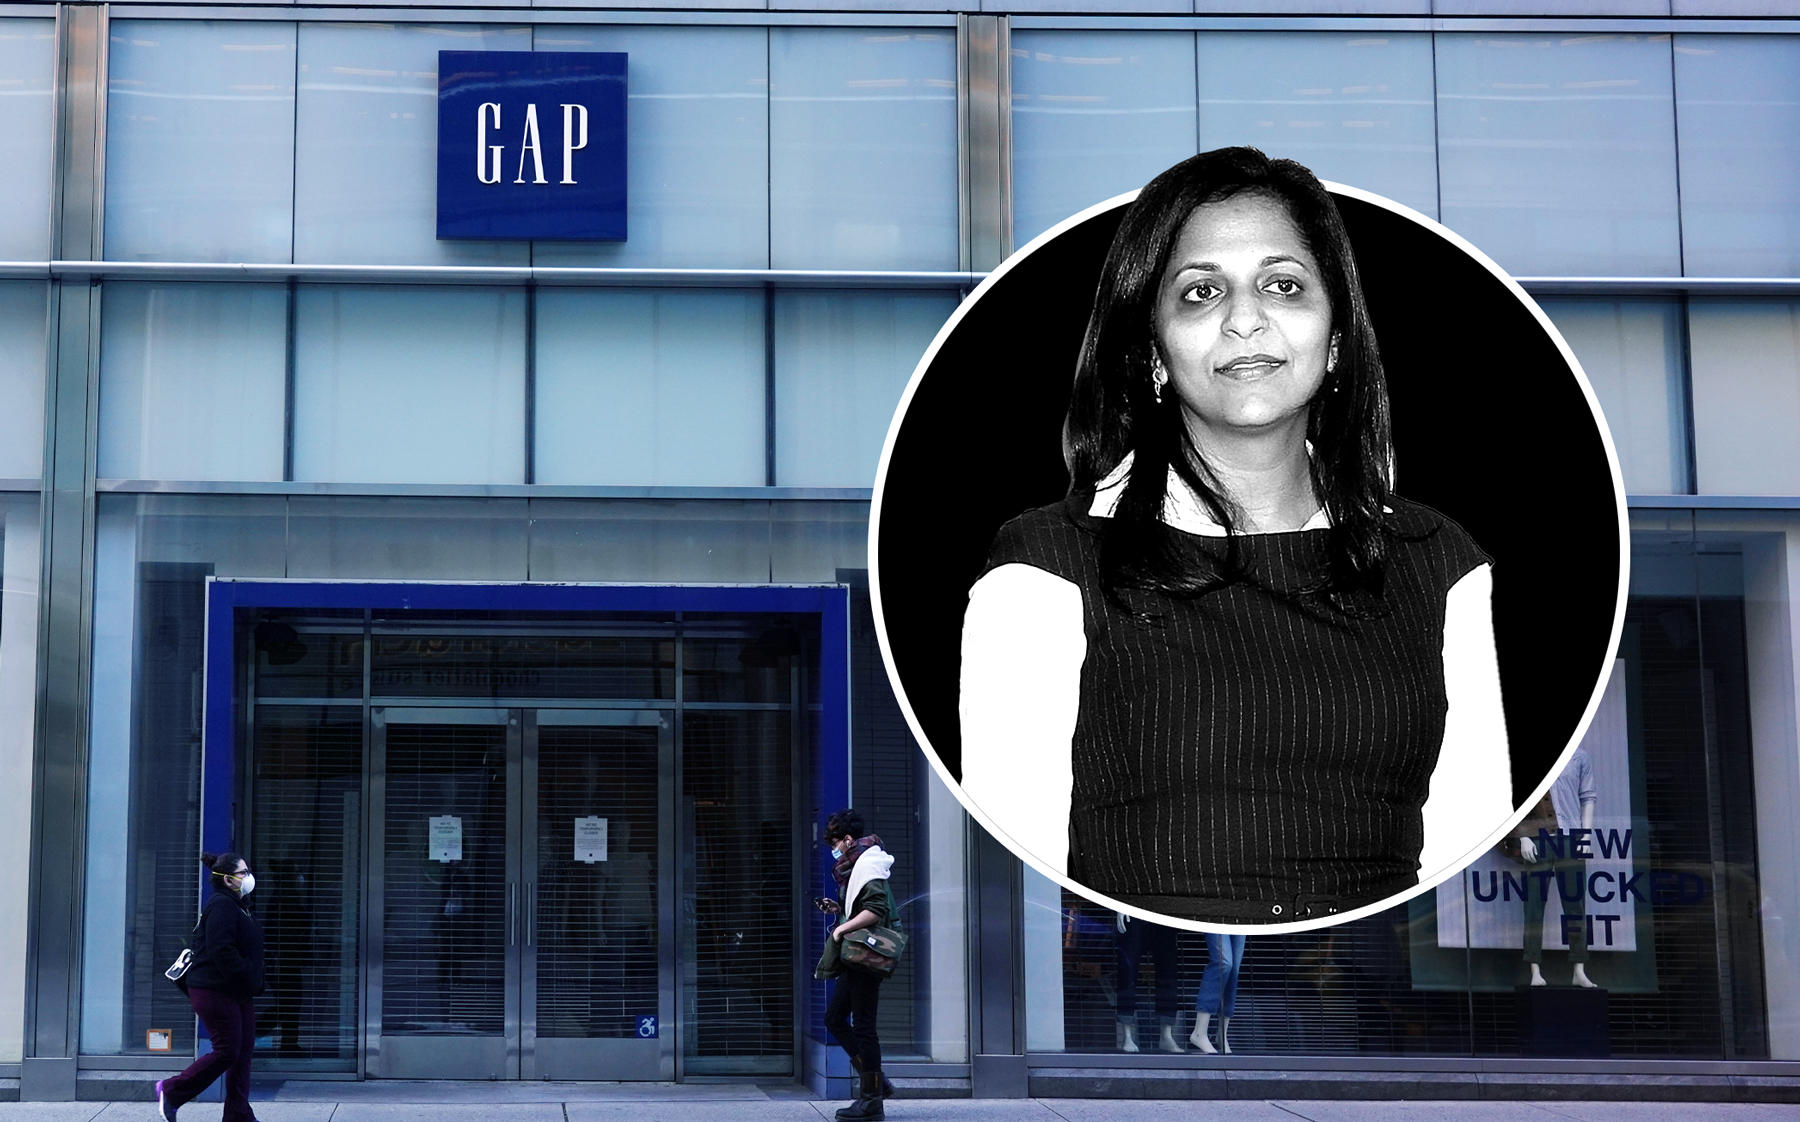 Gap CEO Sonia Syngal said the company plans to reopen with fewer Gap brand stores (Credit: Syngal via Marc Piasecki/Getty Images; Cindy Ord/Getty Images)